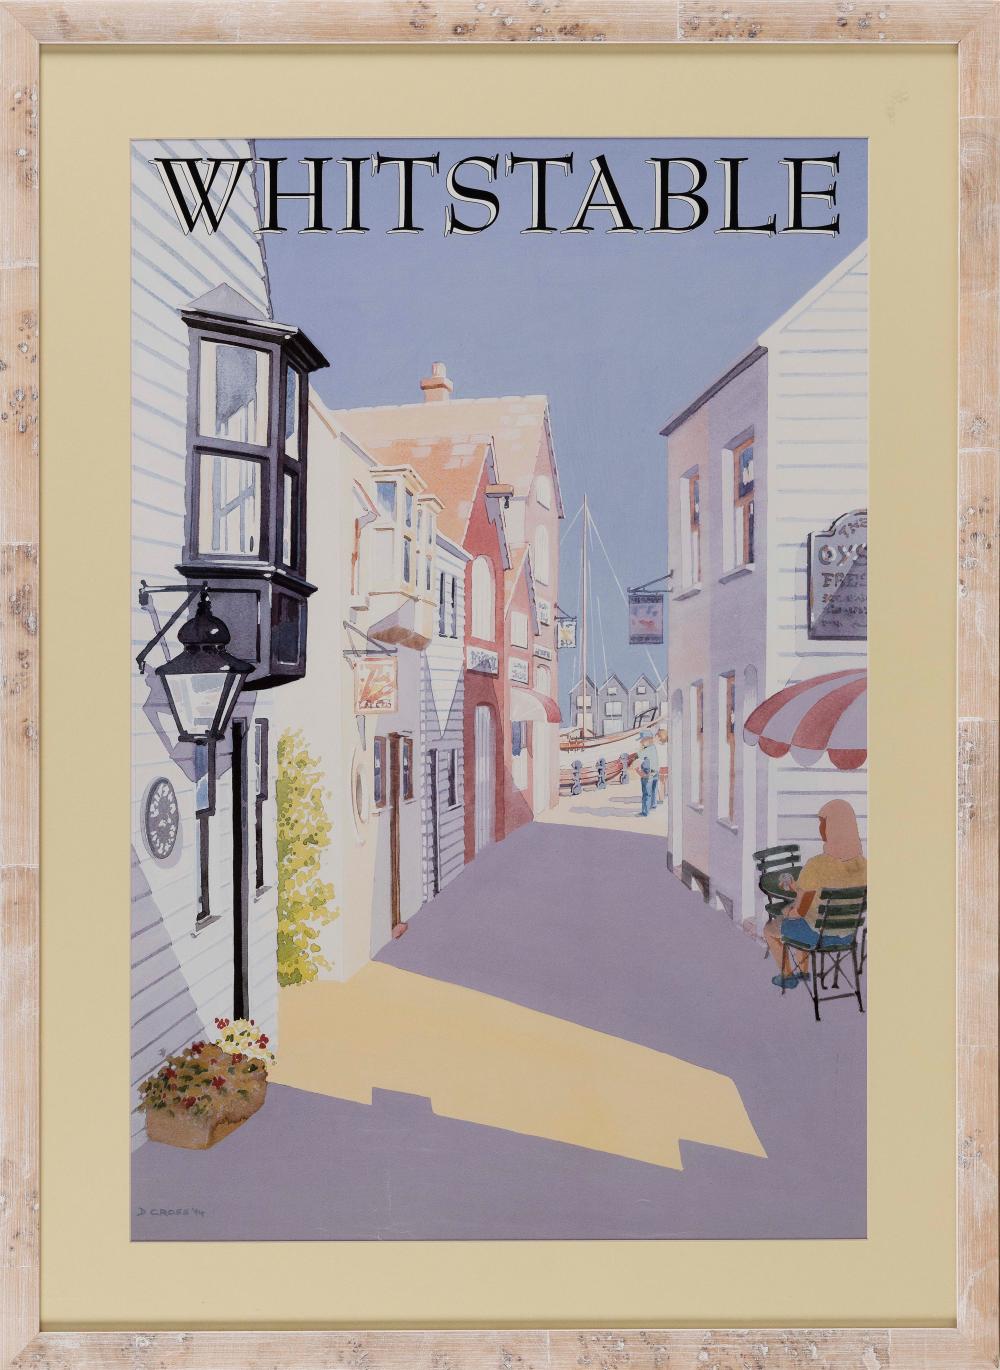 WHITSTABLE PRINT 28" X 18.75" SIGHT.